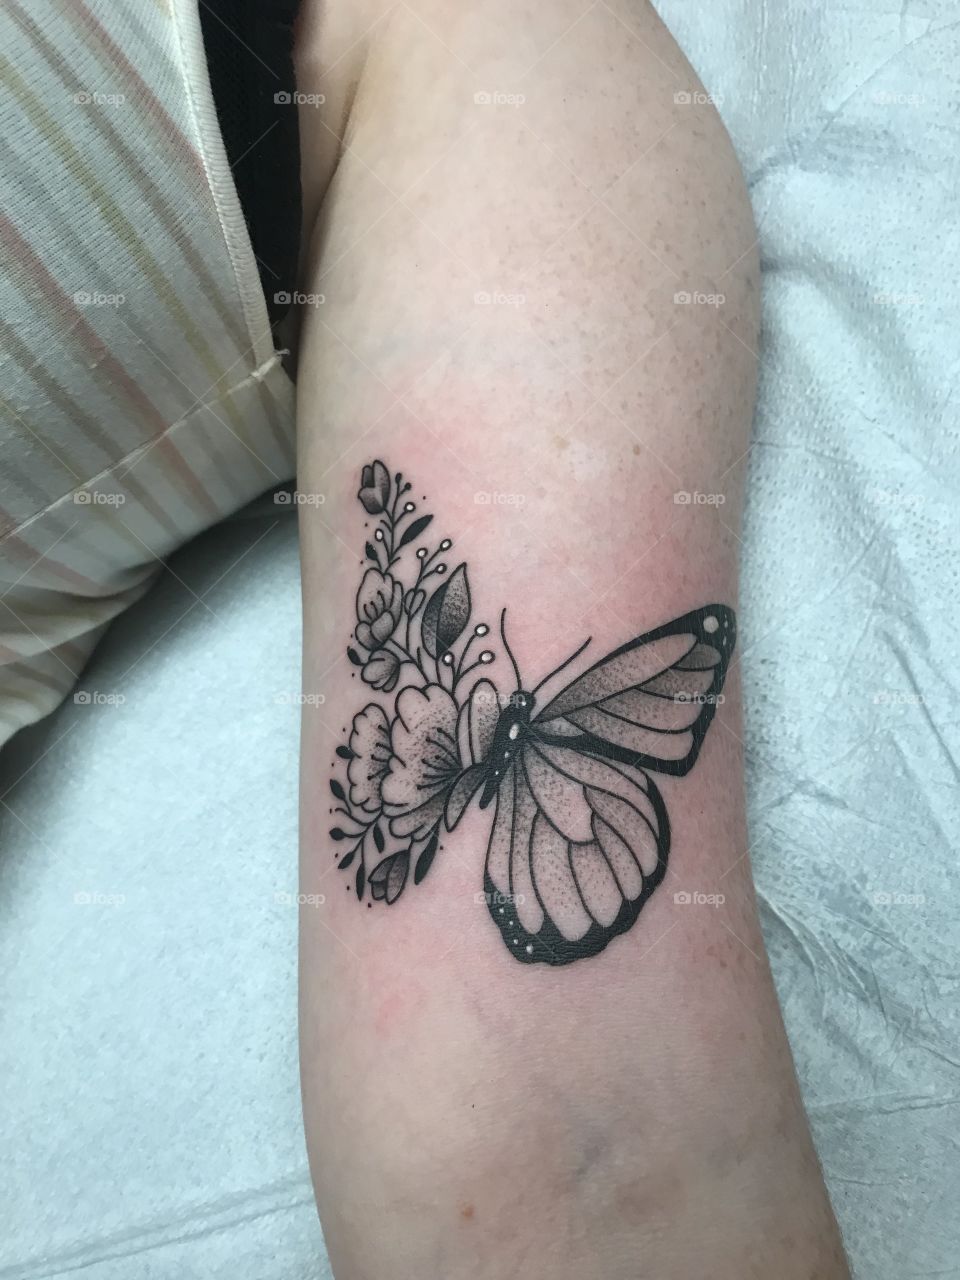 Freshly inked arm tattoo of a butterfly and flowers all over the place